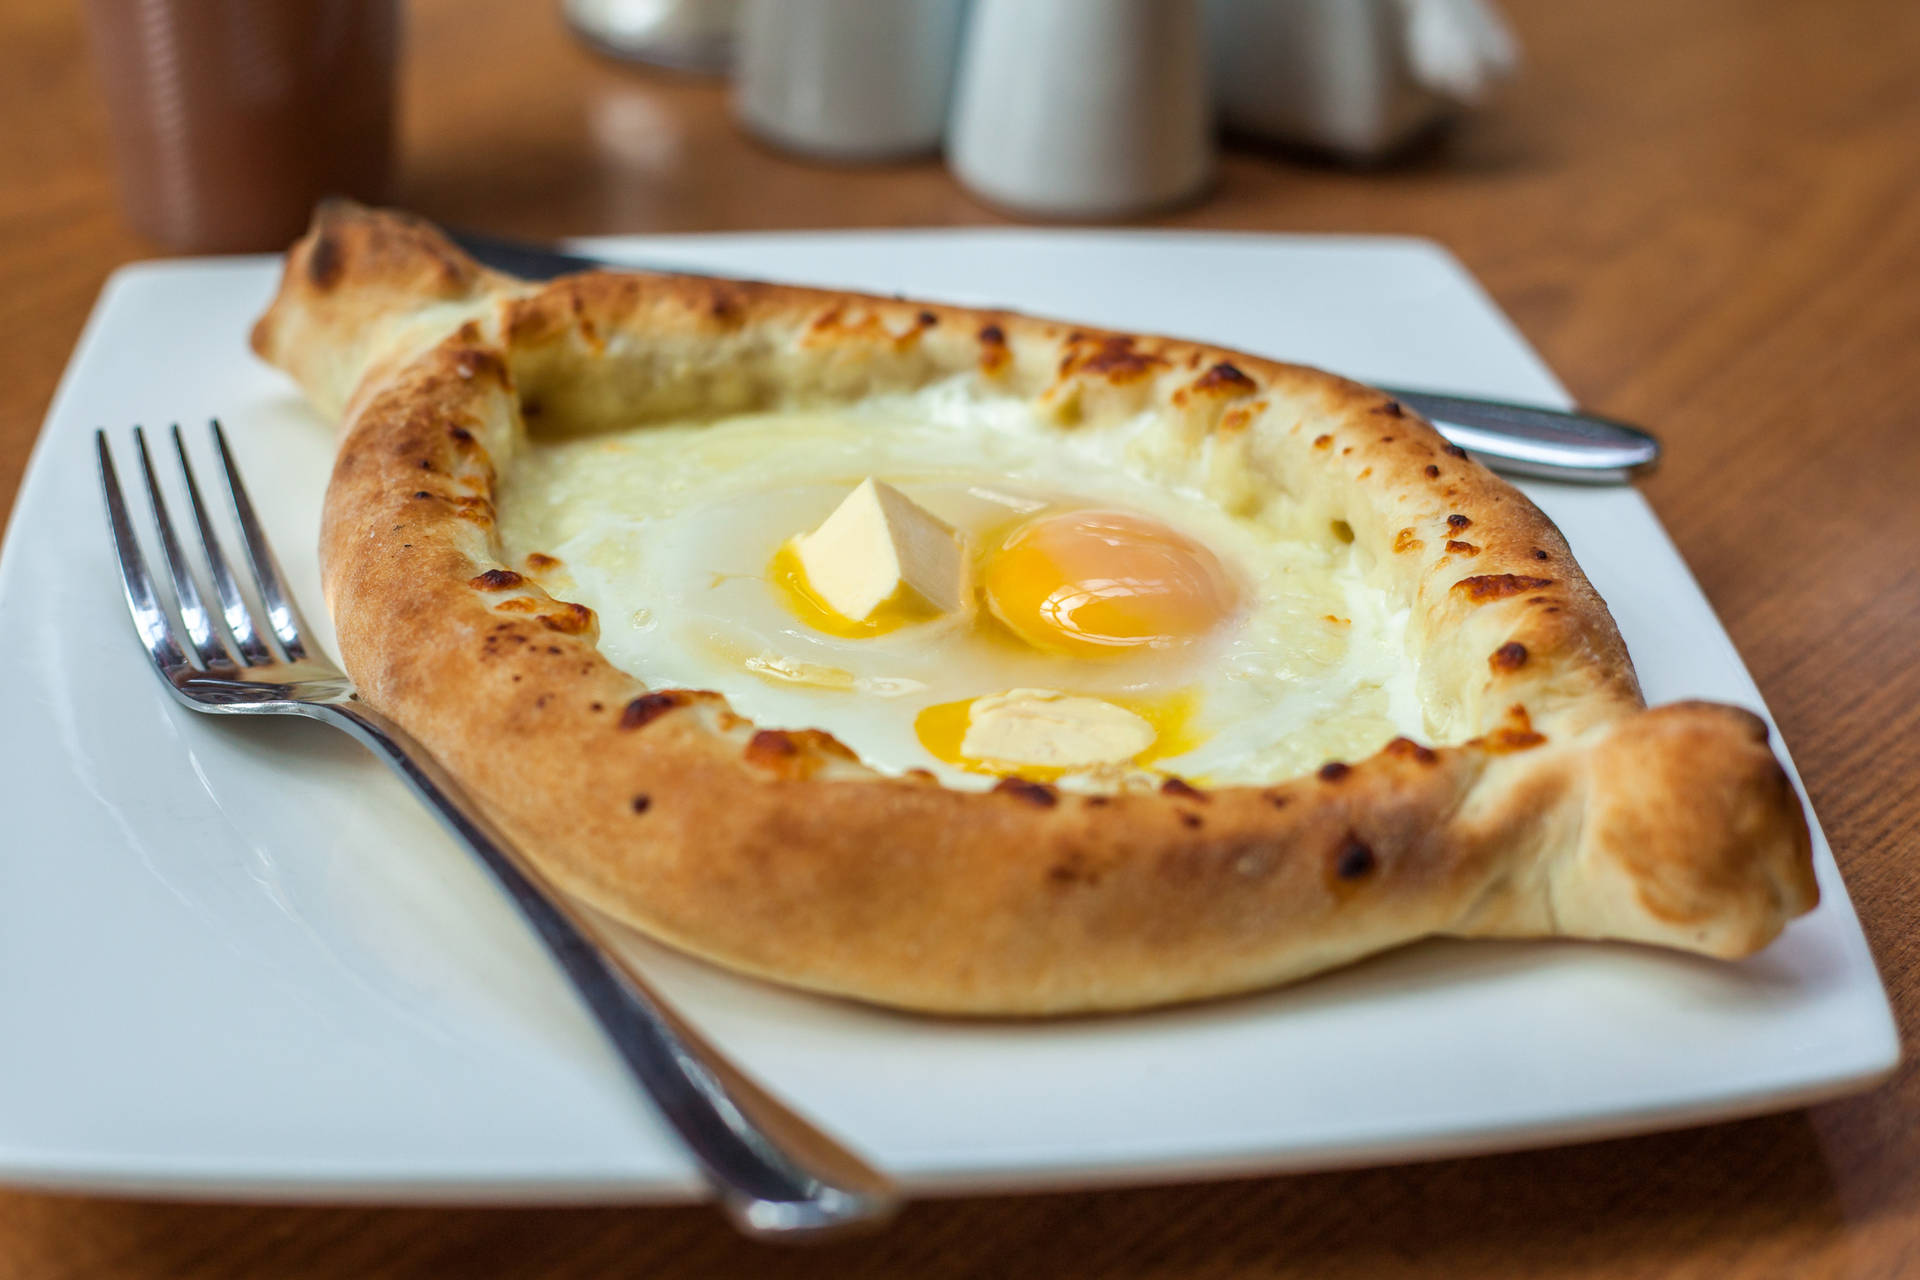 Sizzling Khachapuri Loaded with Melted Cheese and Egg Wallpaper